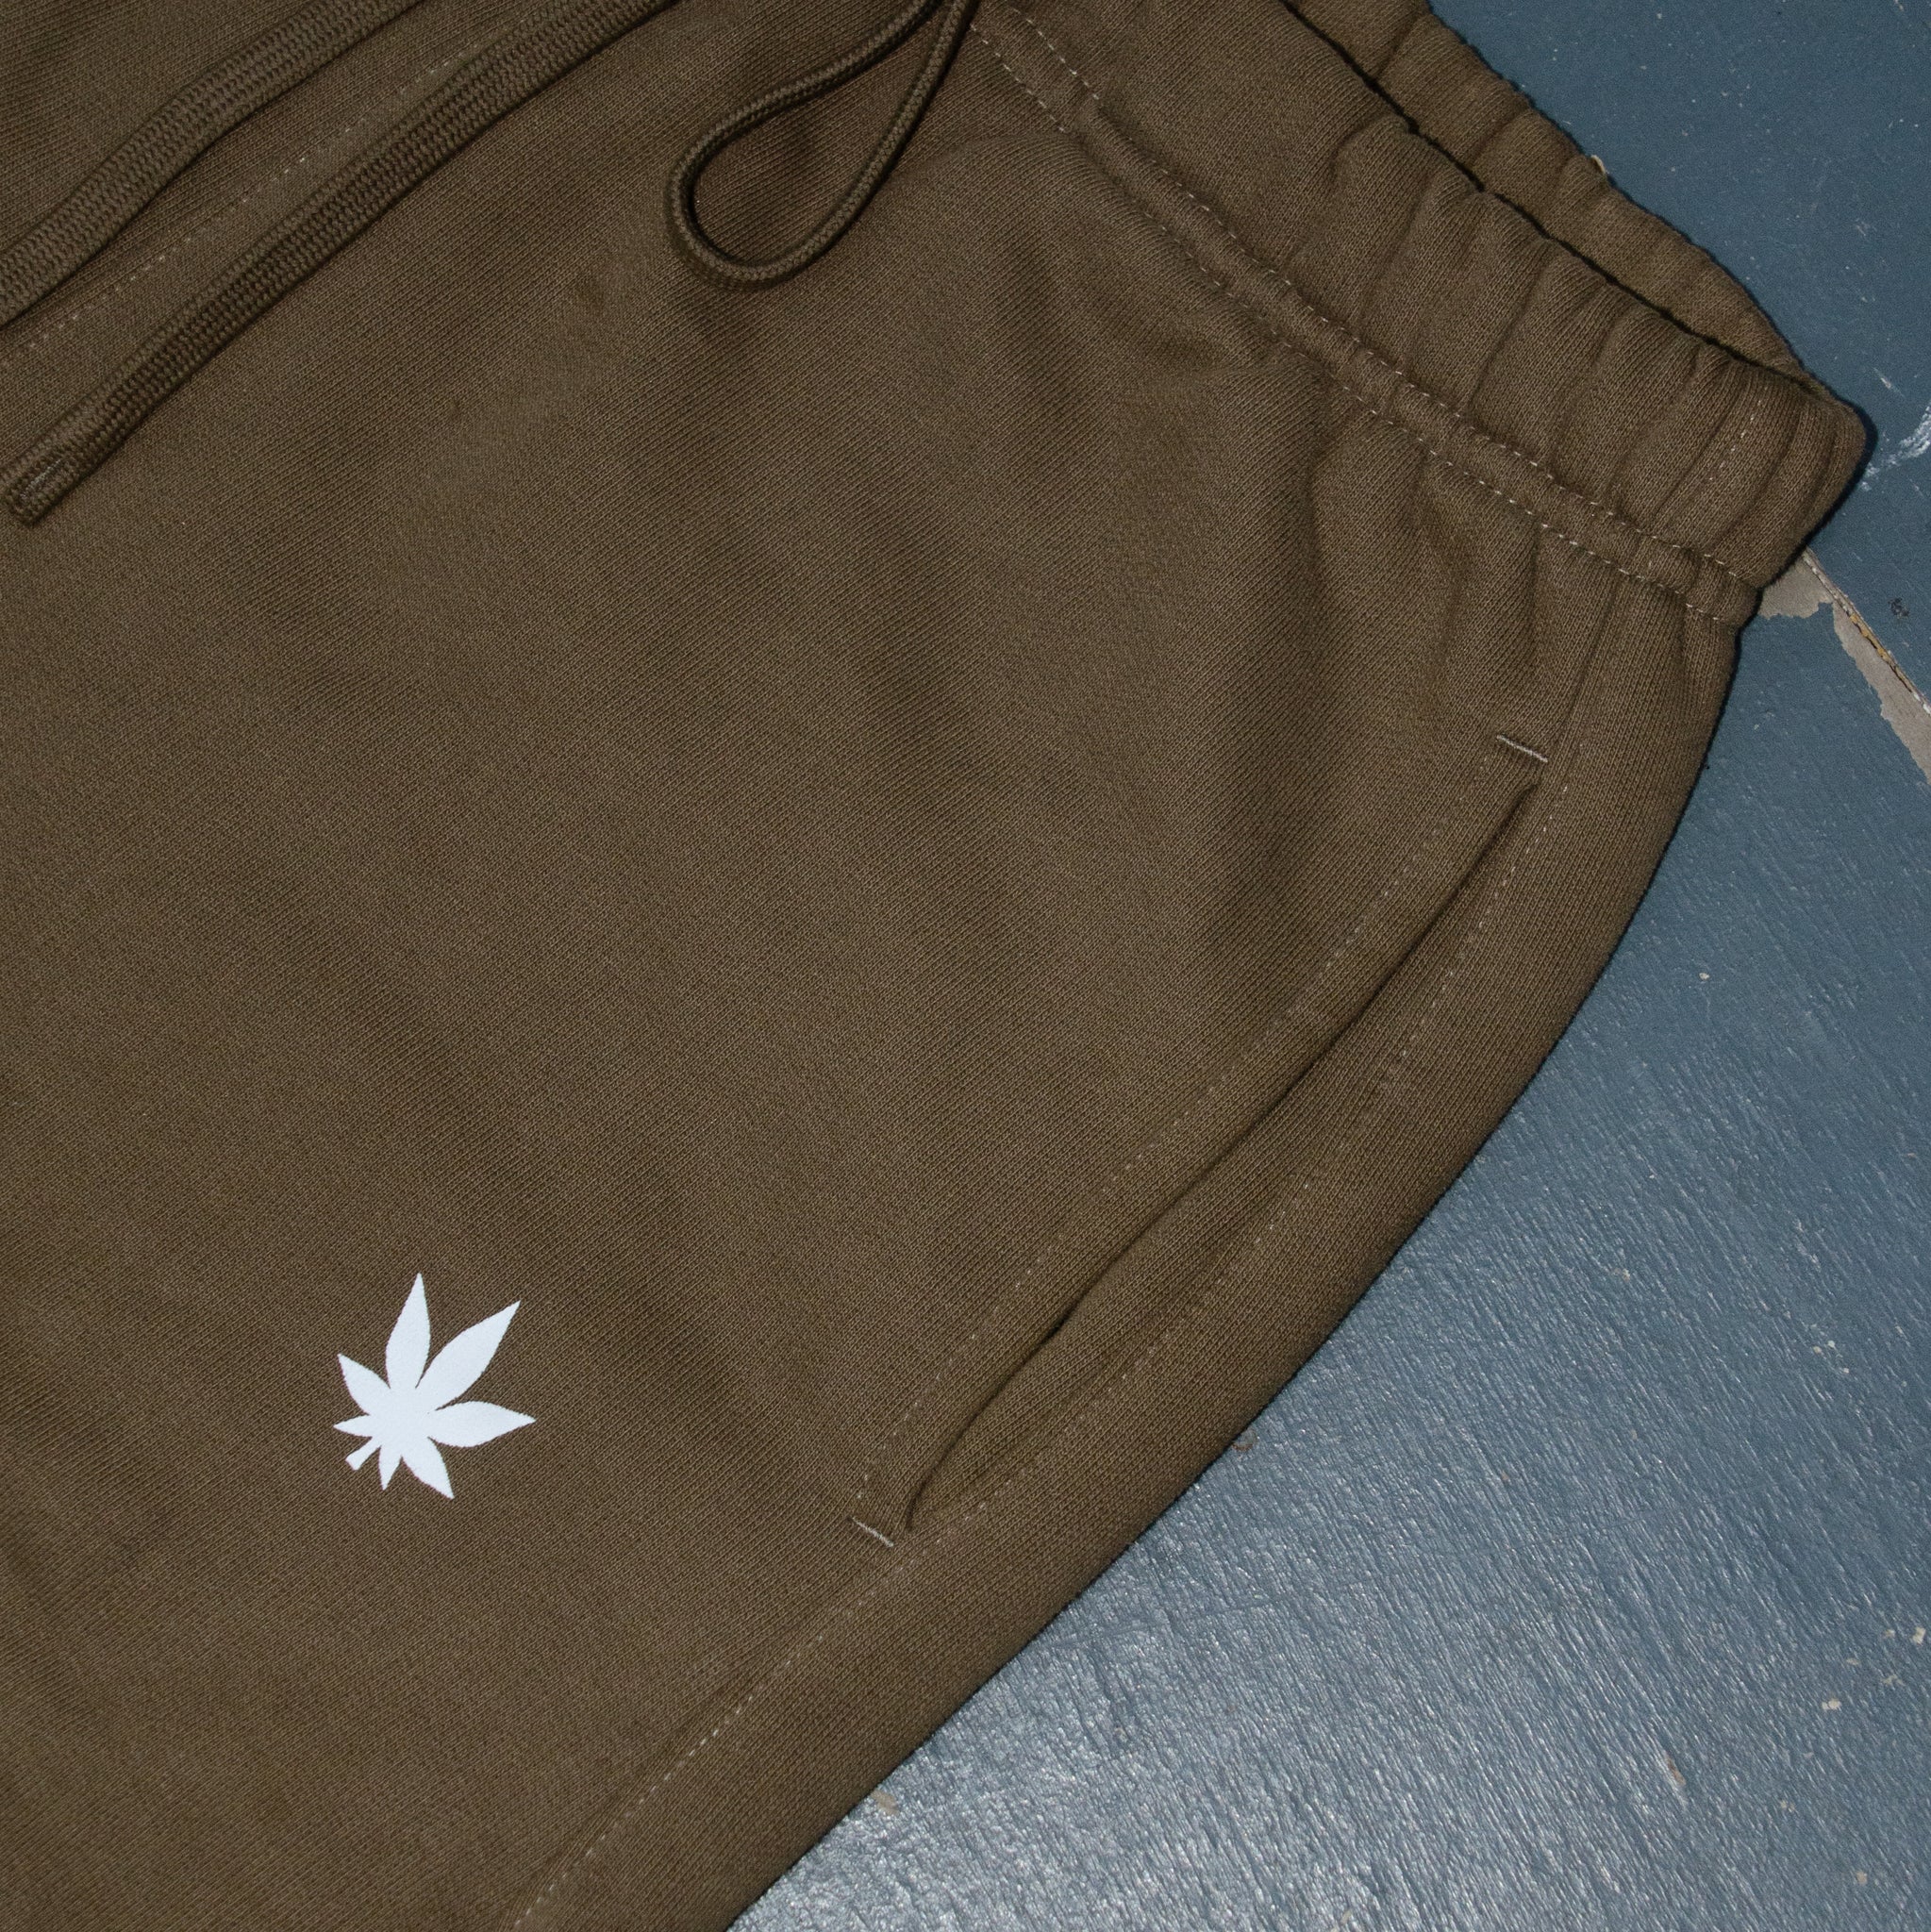 Stoned Blessed : Wide Fit Sweatpants Brown